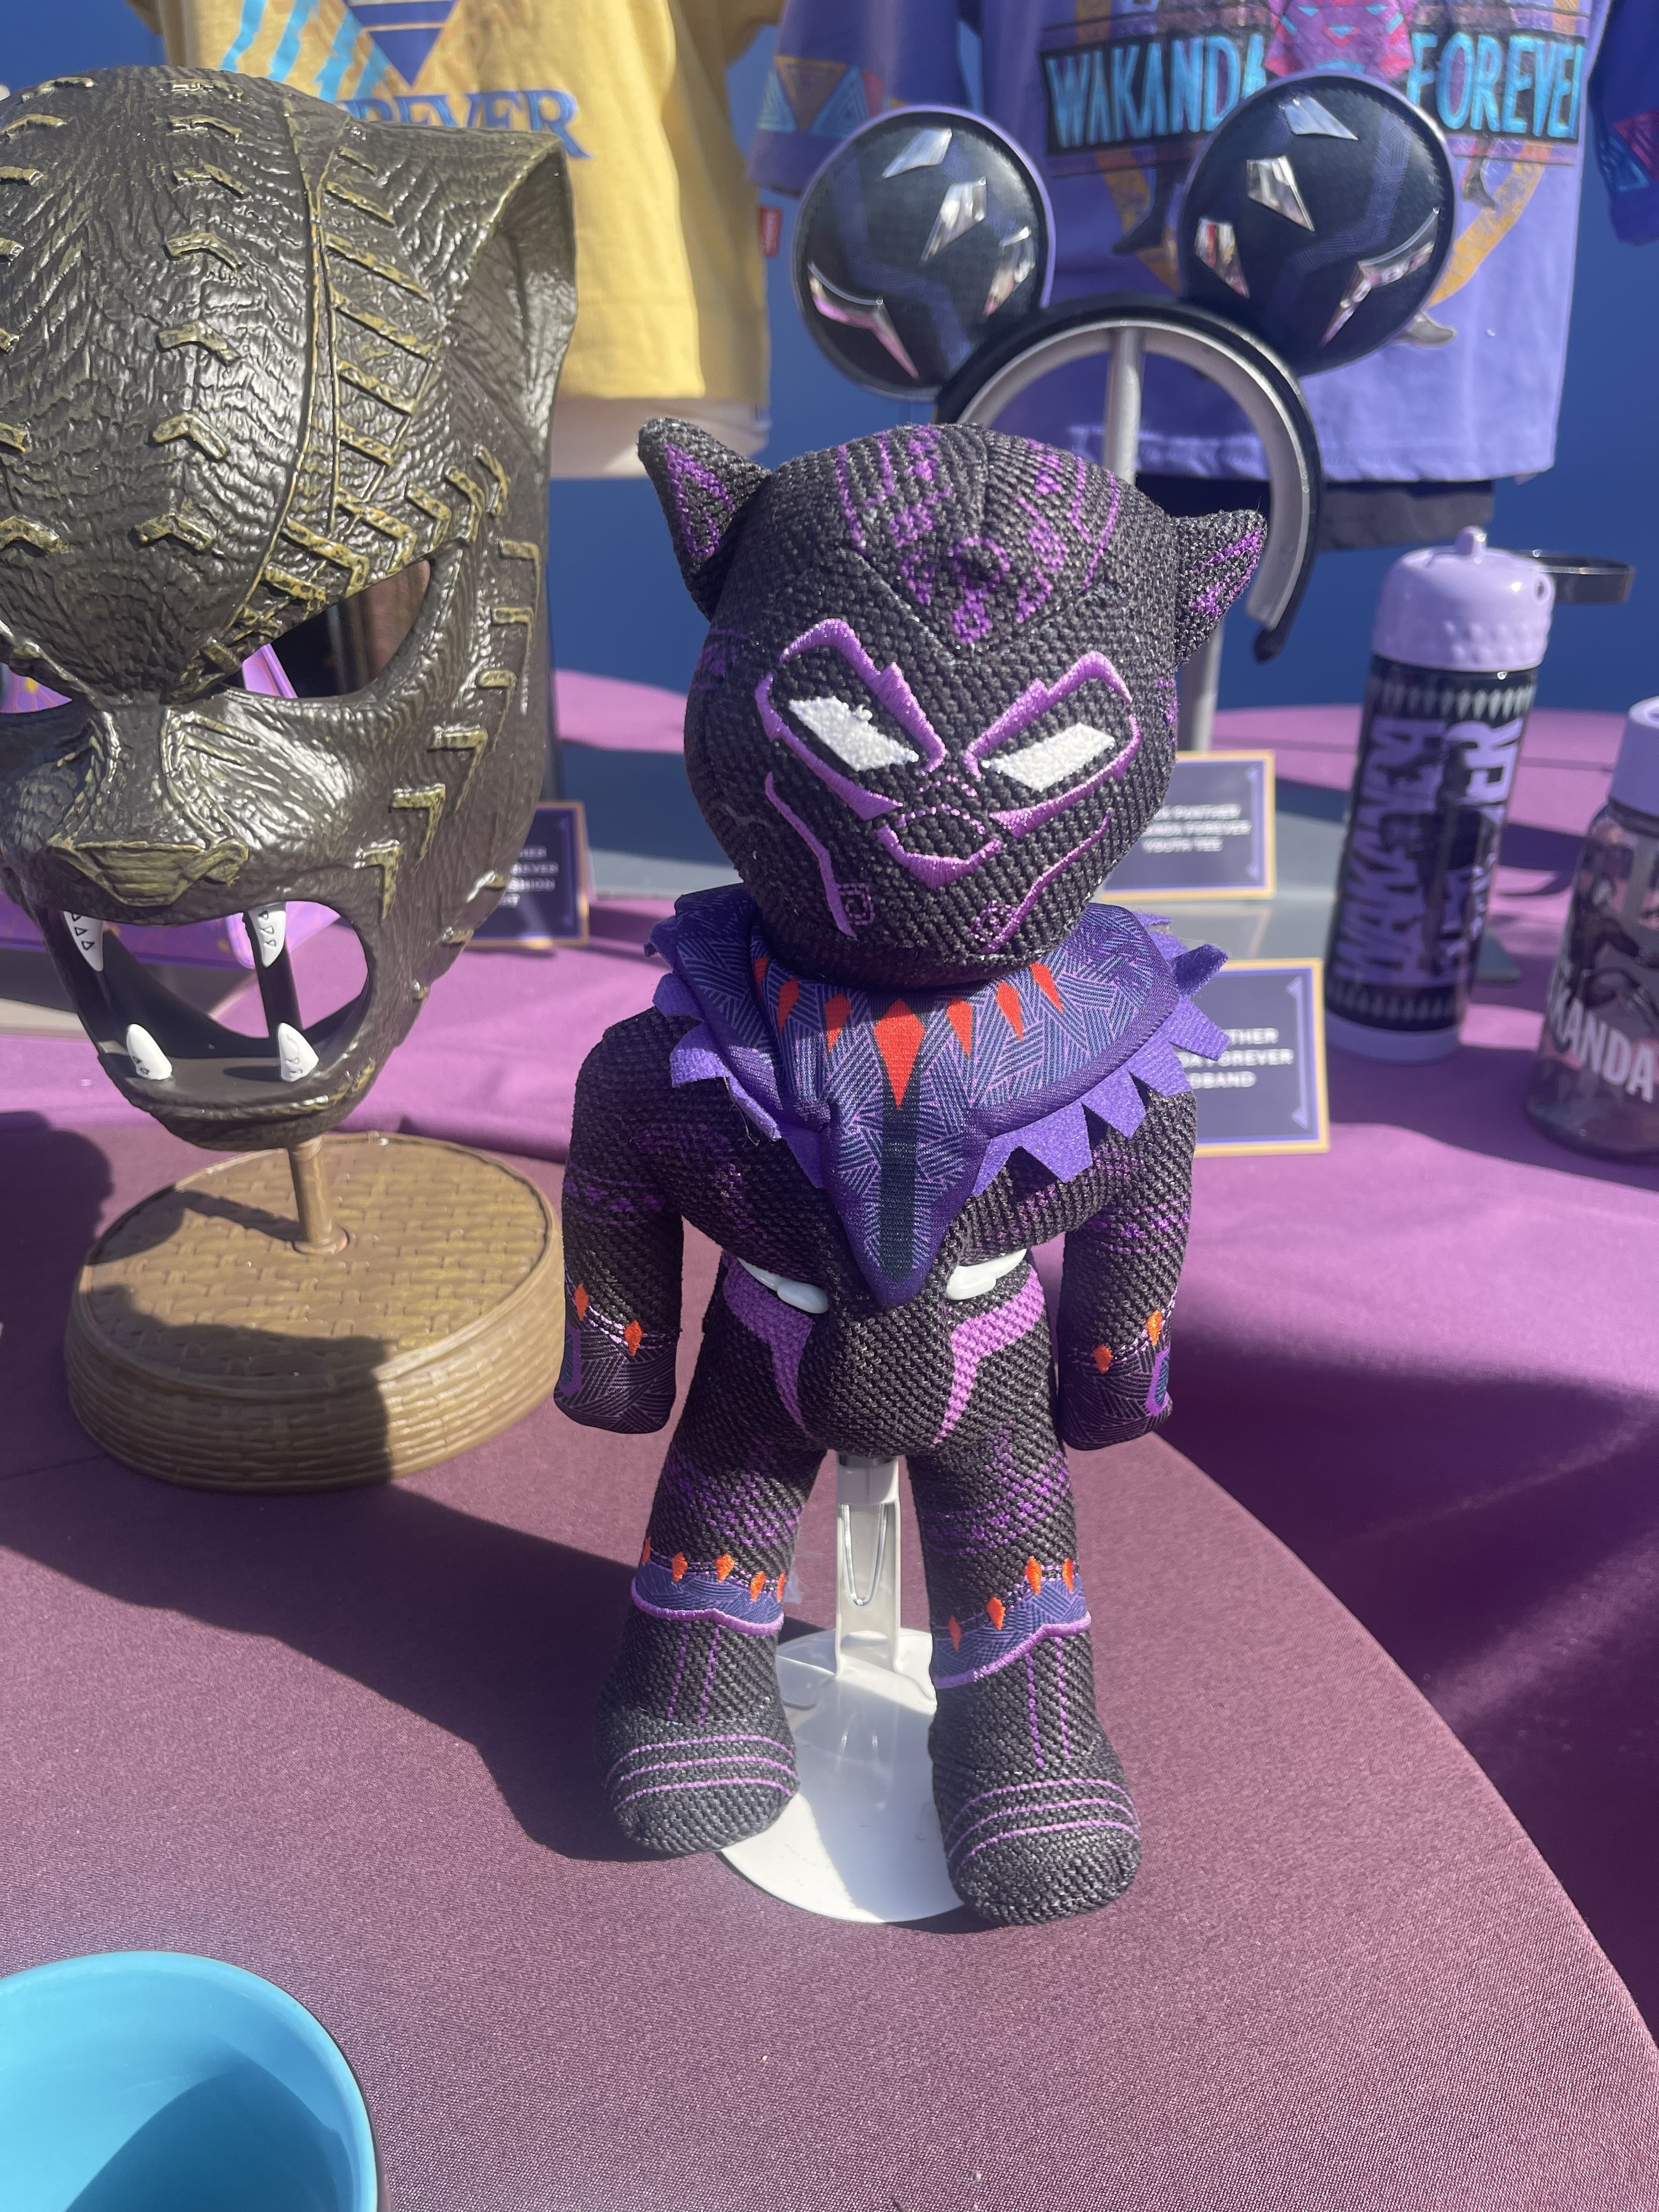 Black Panther doll with Mickey Mouse ears